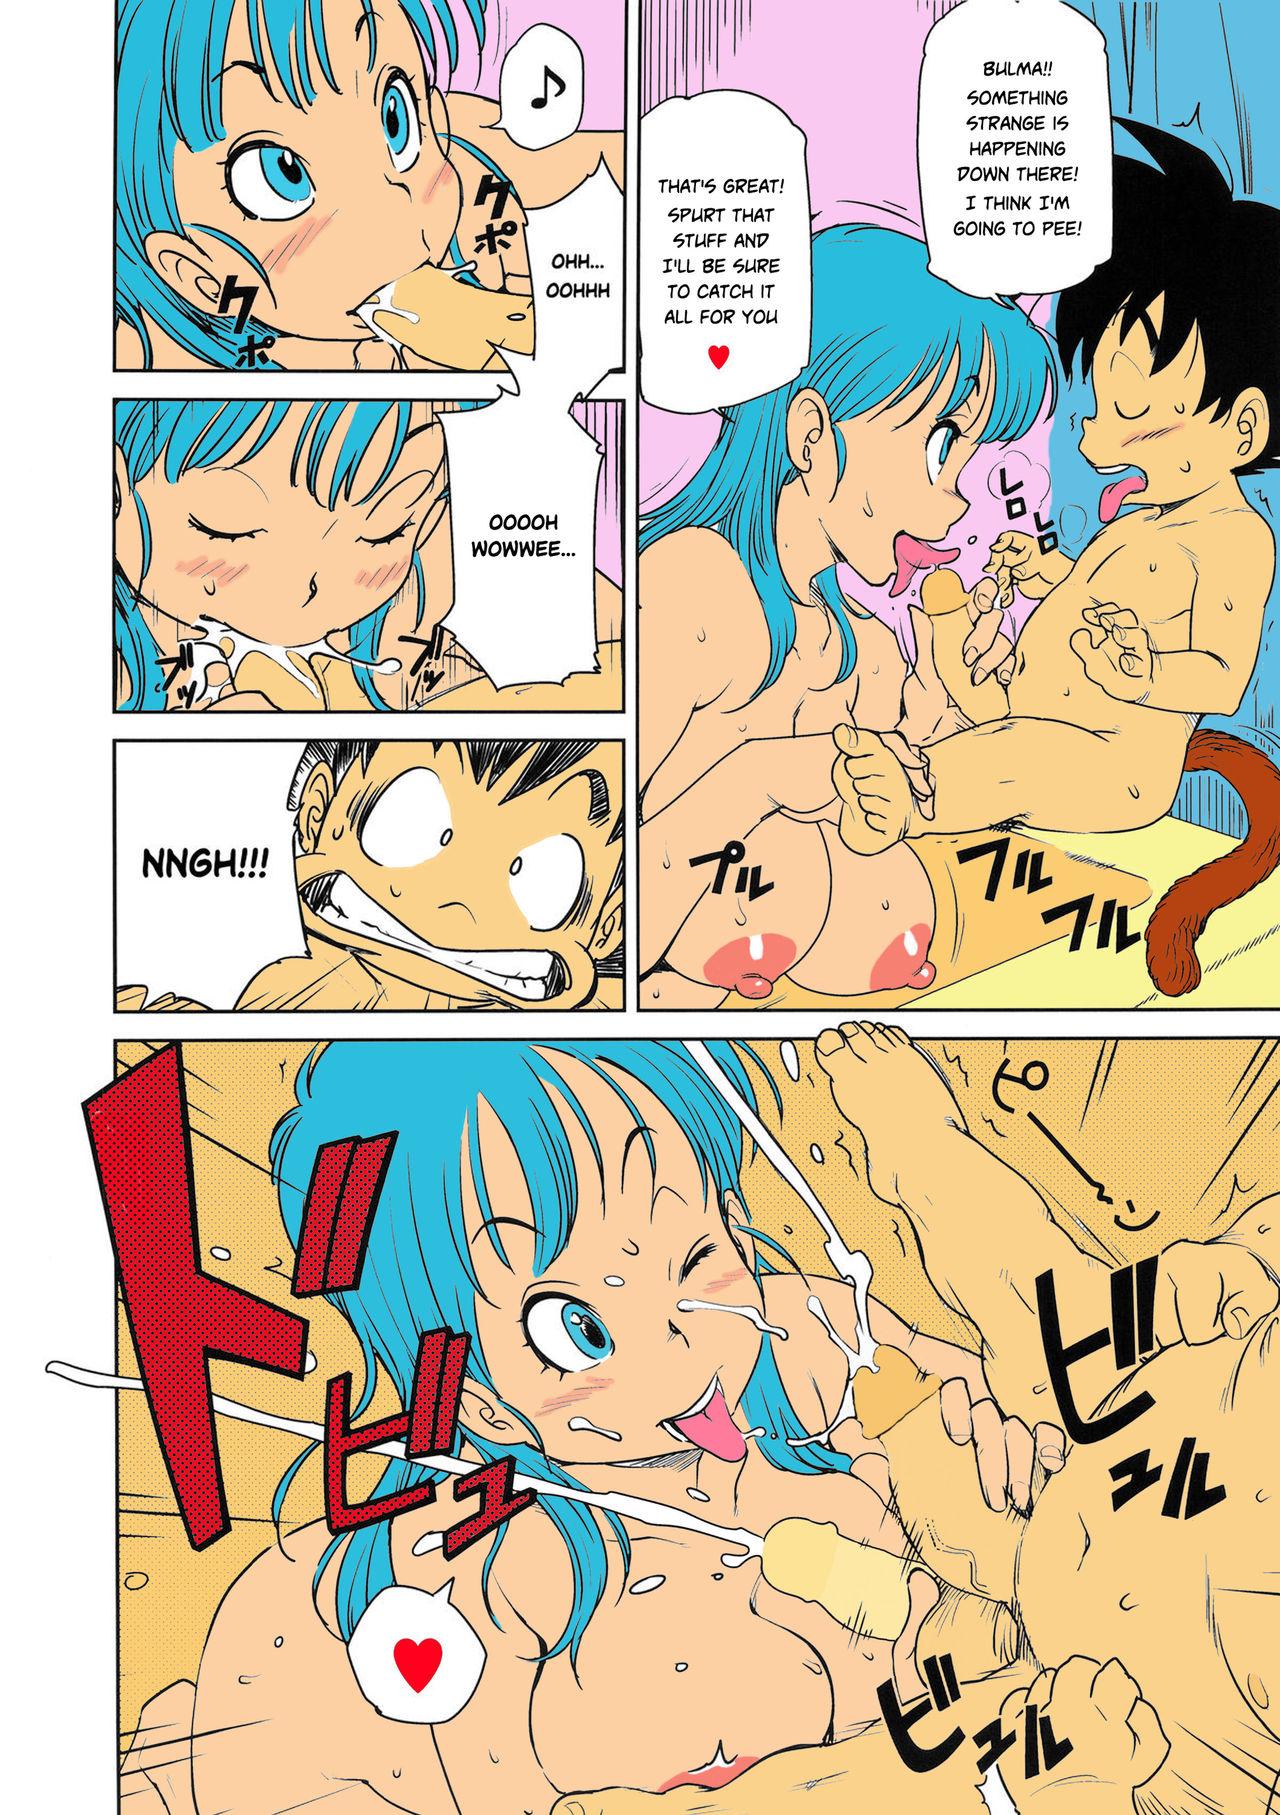 Eromangirl Page 8 Of 24 dragon ball hentai haven, Eromangirl Page 8 Of 24 d...